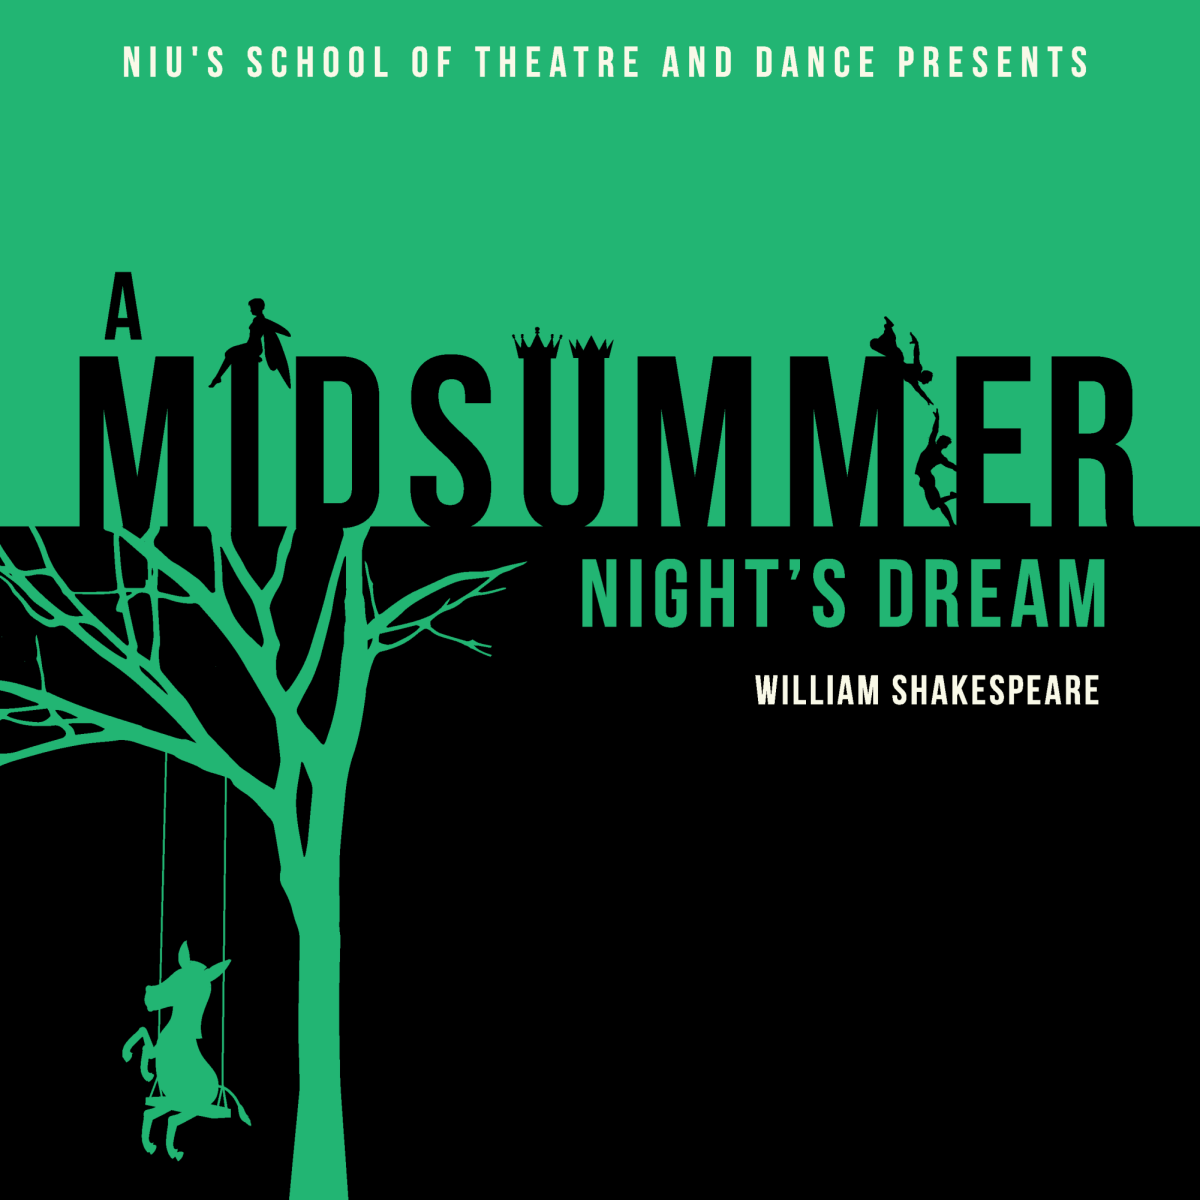 A+green+and+black+poster+displays+the+title+of+the+Shakespeare+play+A+Midsummer+Nights+Dream.+NIUs+School+of+Theatre+and+Dance+will+continue+showings+of+the+play+on+Thursday.+%28Courtesy+of+Andy+Dolan%29